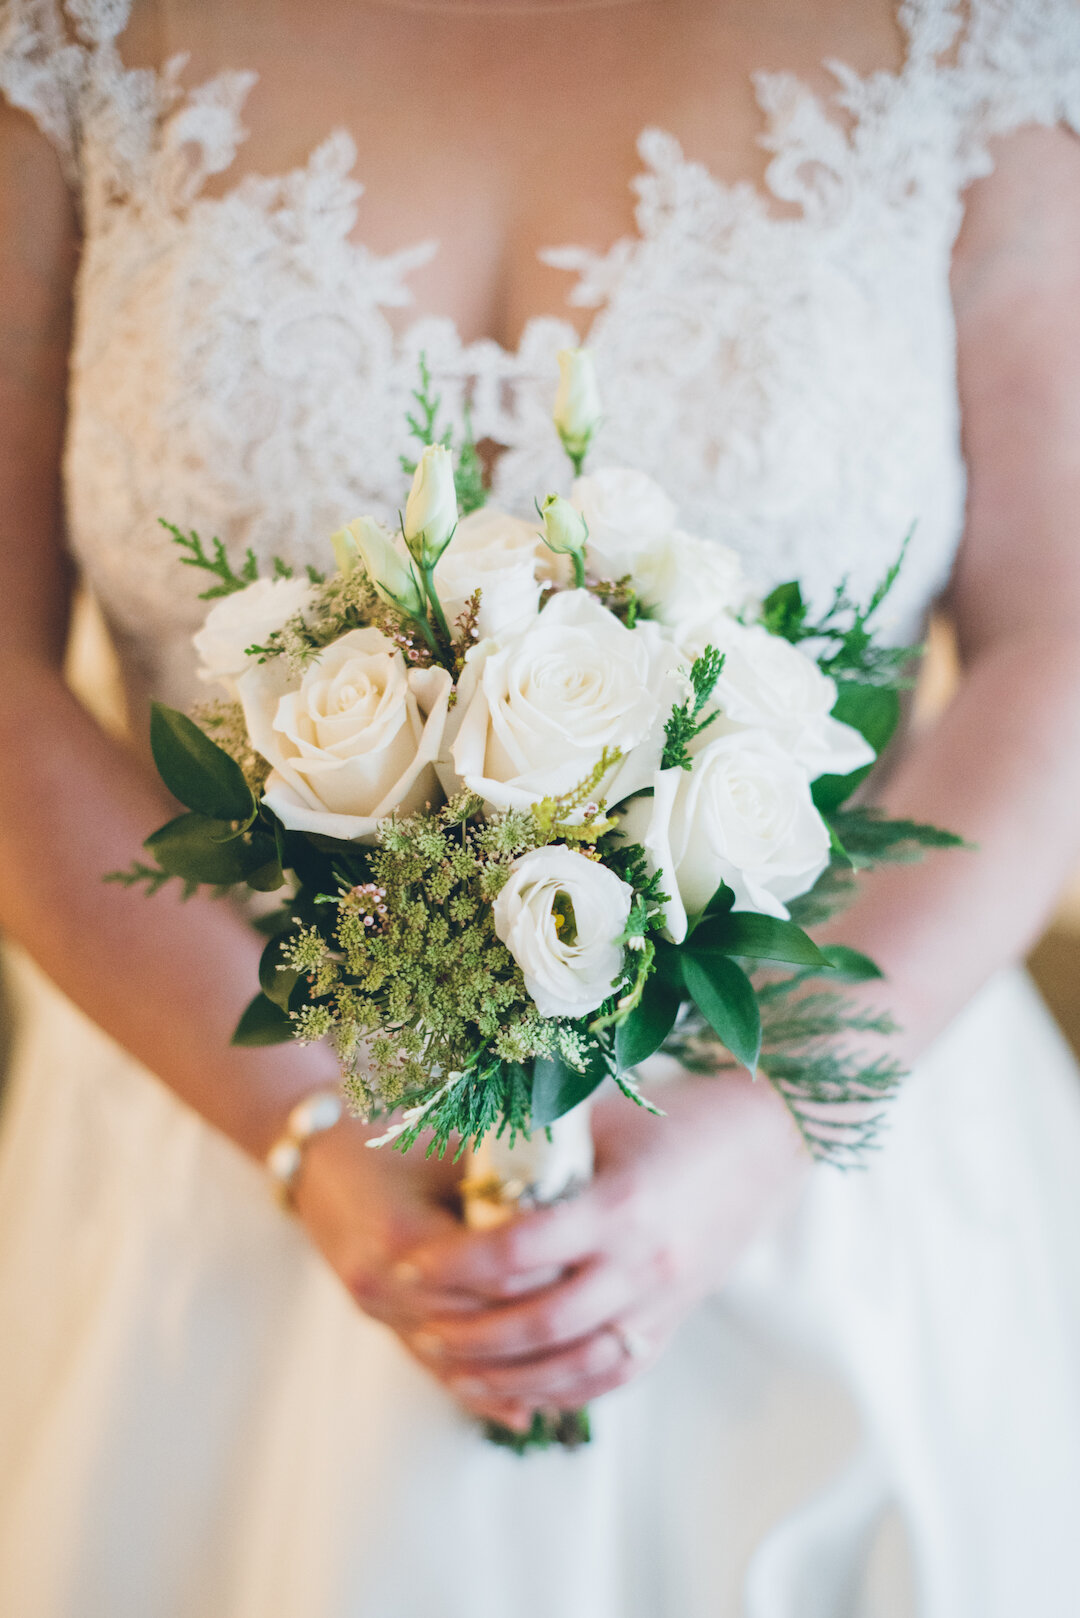 White wedding bouquet: Classic Chicago Winter Wedding captured by Zach Caddy featured on CHI thee WED. See more winter wedding ideas at CHItheeWED.com!